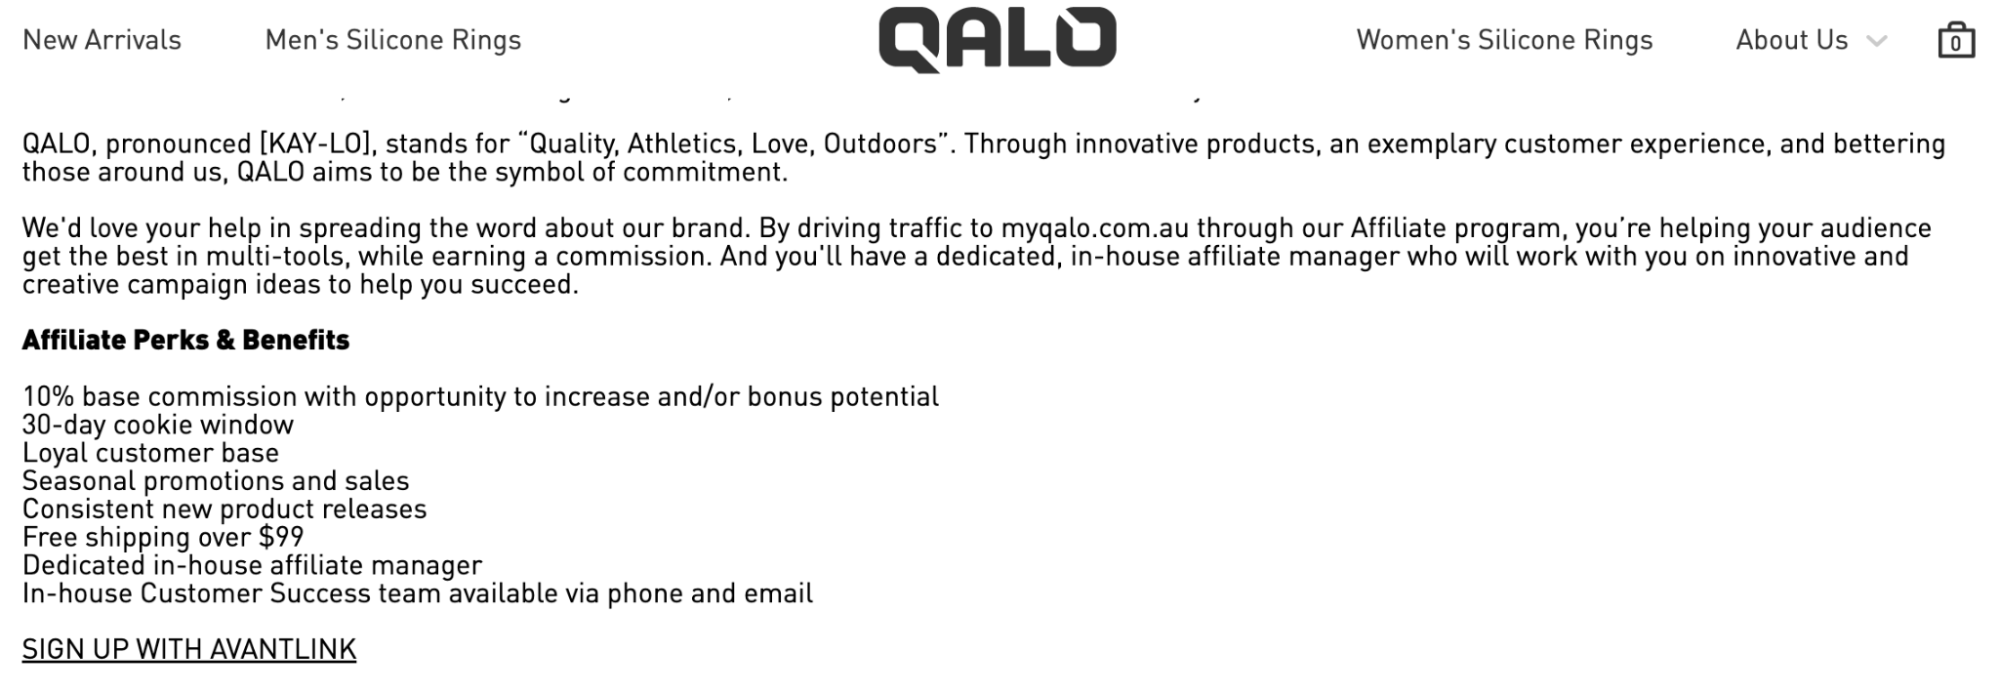 QALO affiliate program webpage with information on affiliate perks and benefits.